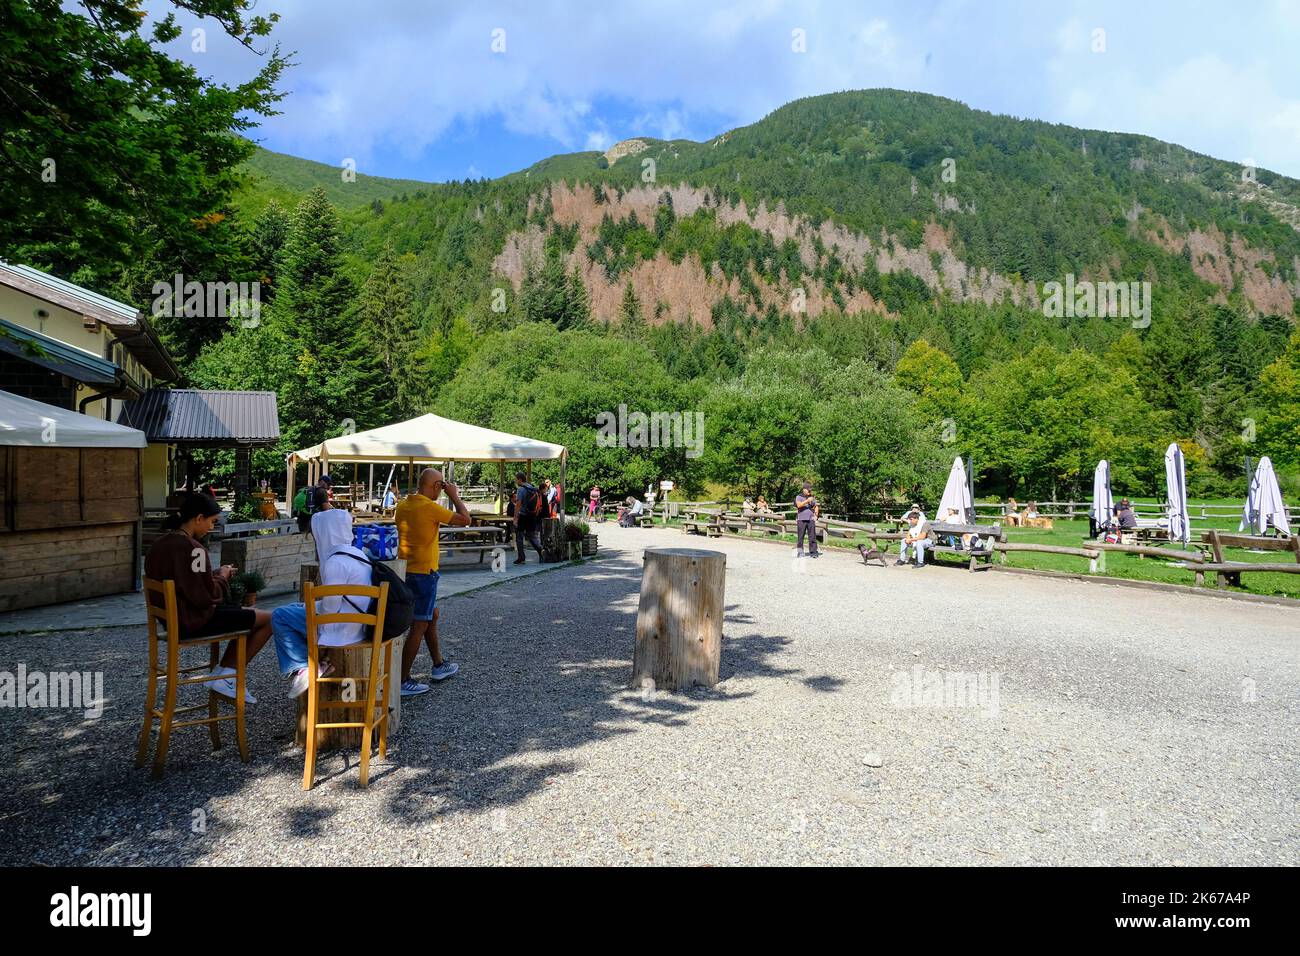 Shelter in the mountains with tourists across parked motorcycles. National park Appennino Tosco-Emiliano, Lagdei, Emilia-Romagna Stock Photo